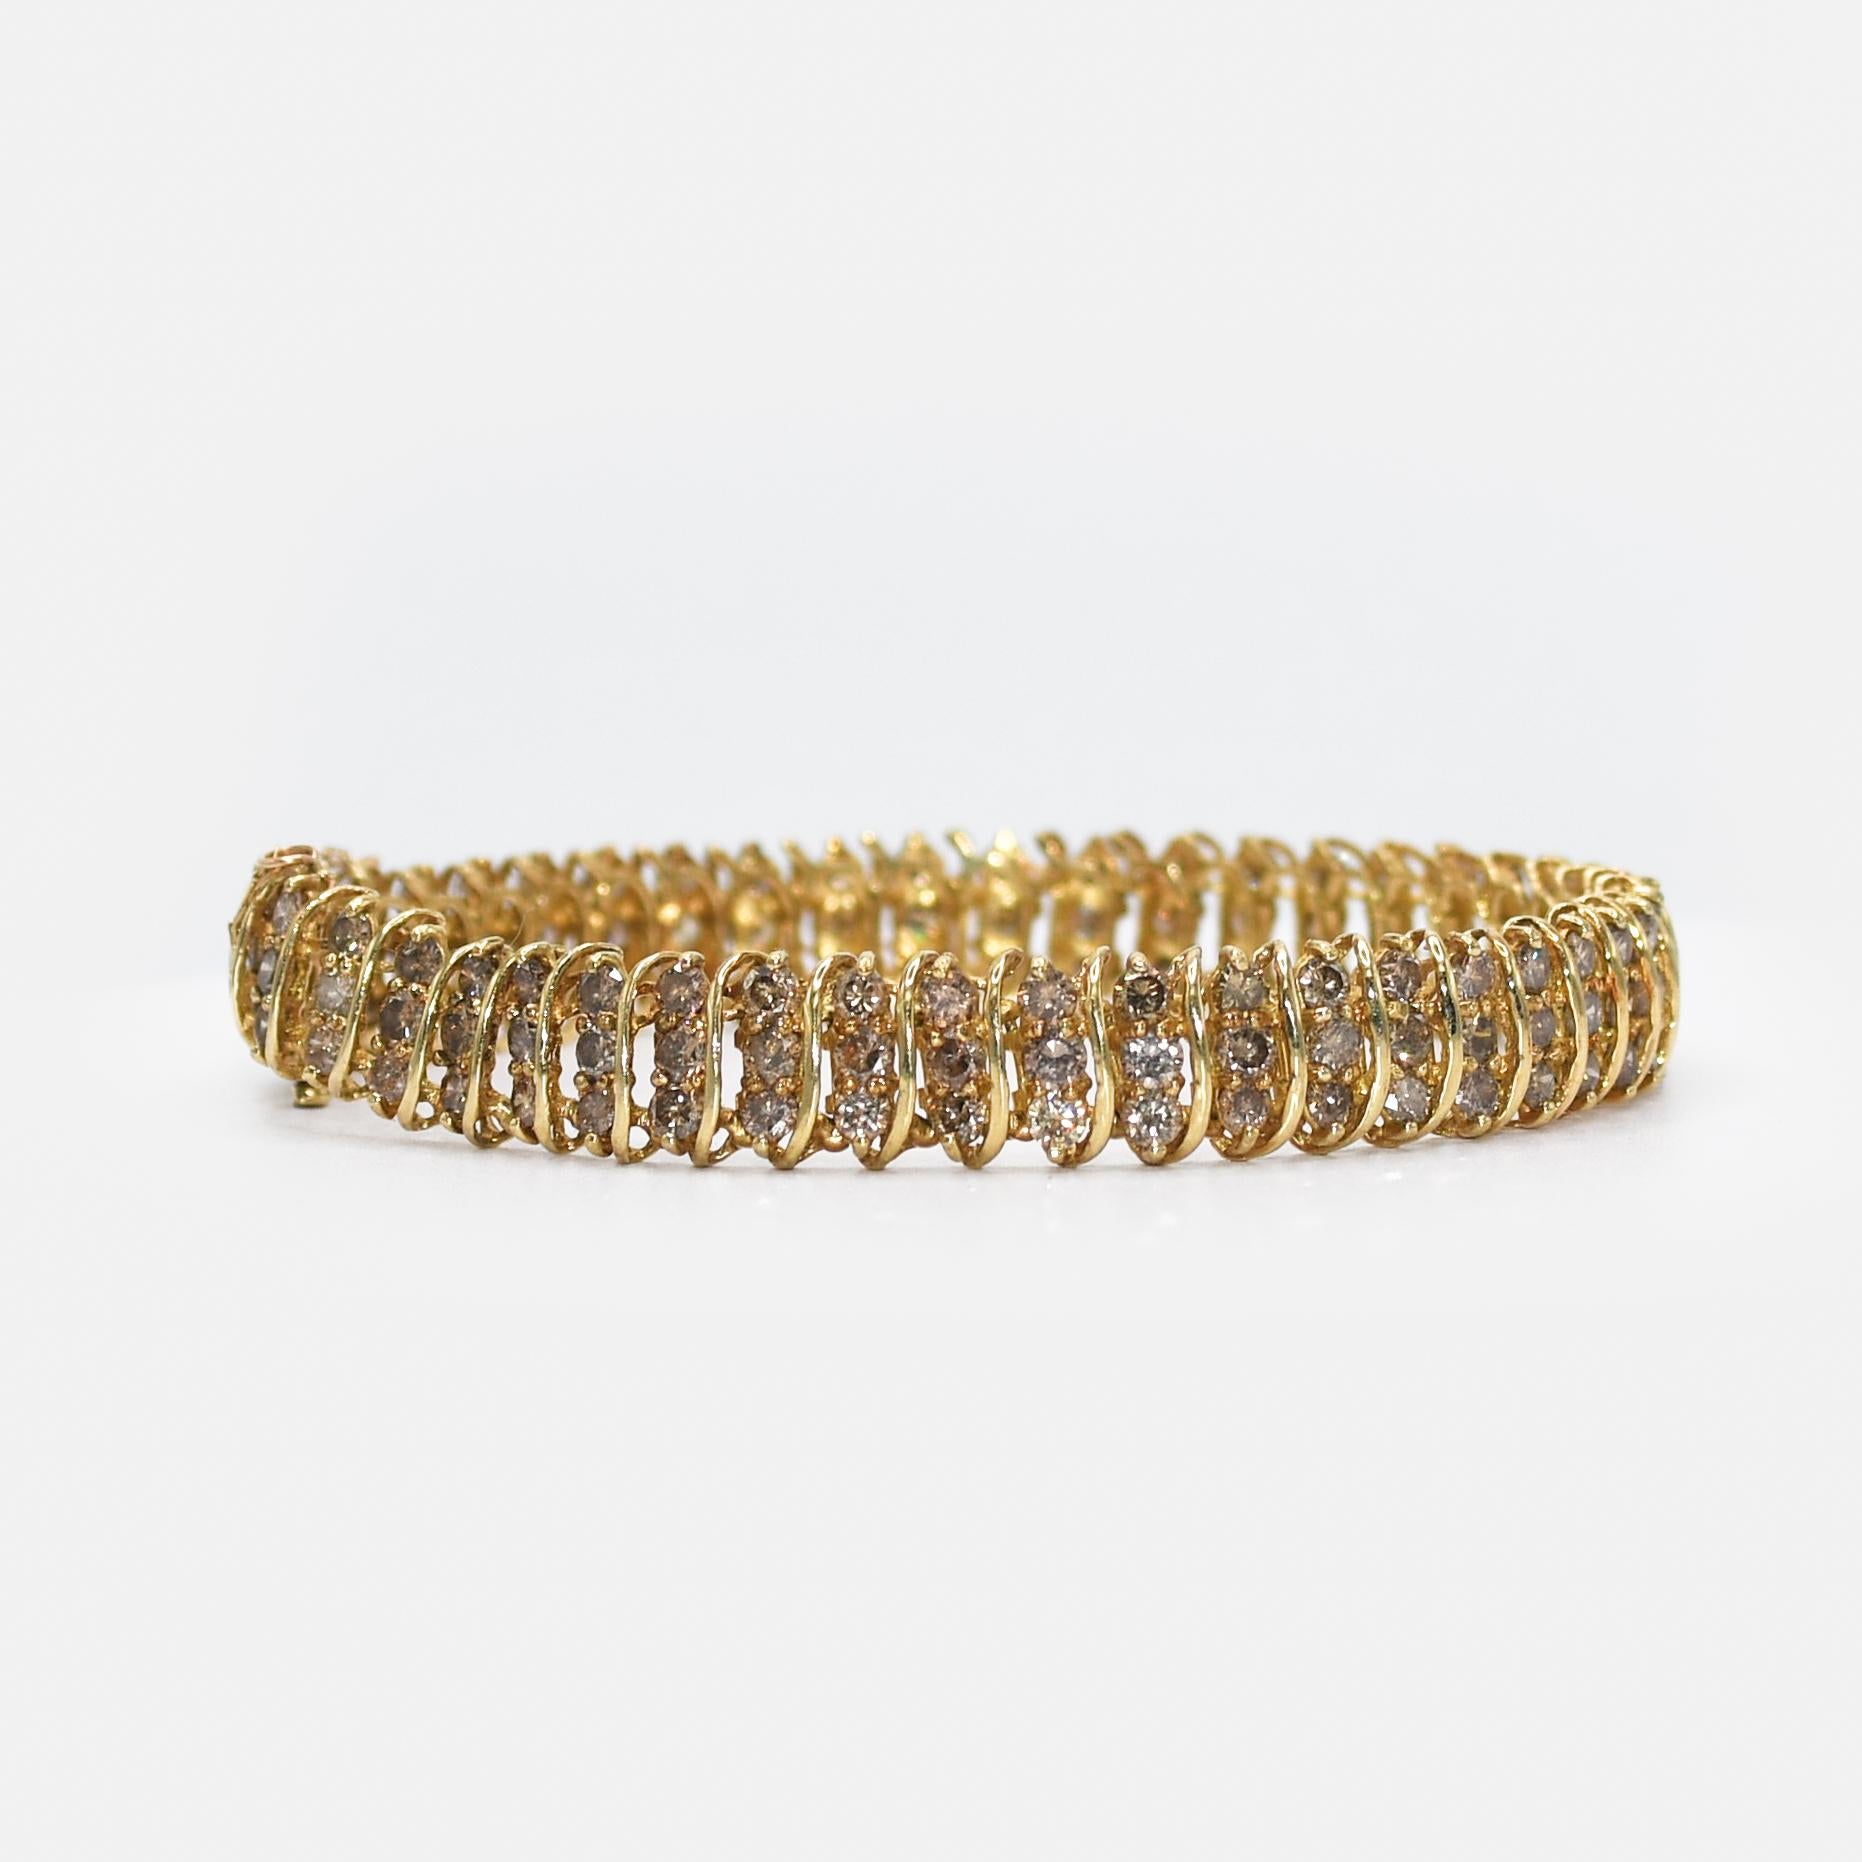 10k Yellow Gold Diamond Bracelet 7.00tcw, 17.2gr
10k Yellow Gold Diamond Bracelet with 7.00tcw. 
Diamond Clarity is I1-I2, light brown color, M +.
Stamped 10k, weighs 17.2gr.
Will fit a 7 1/2in wrist.